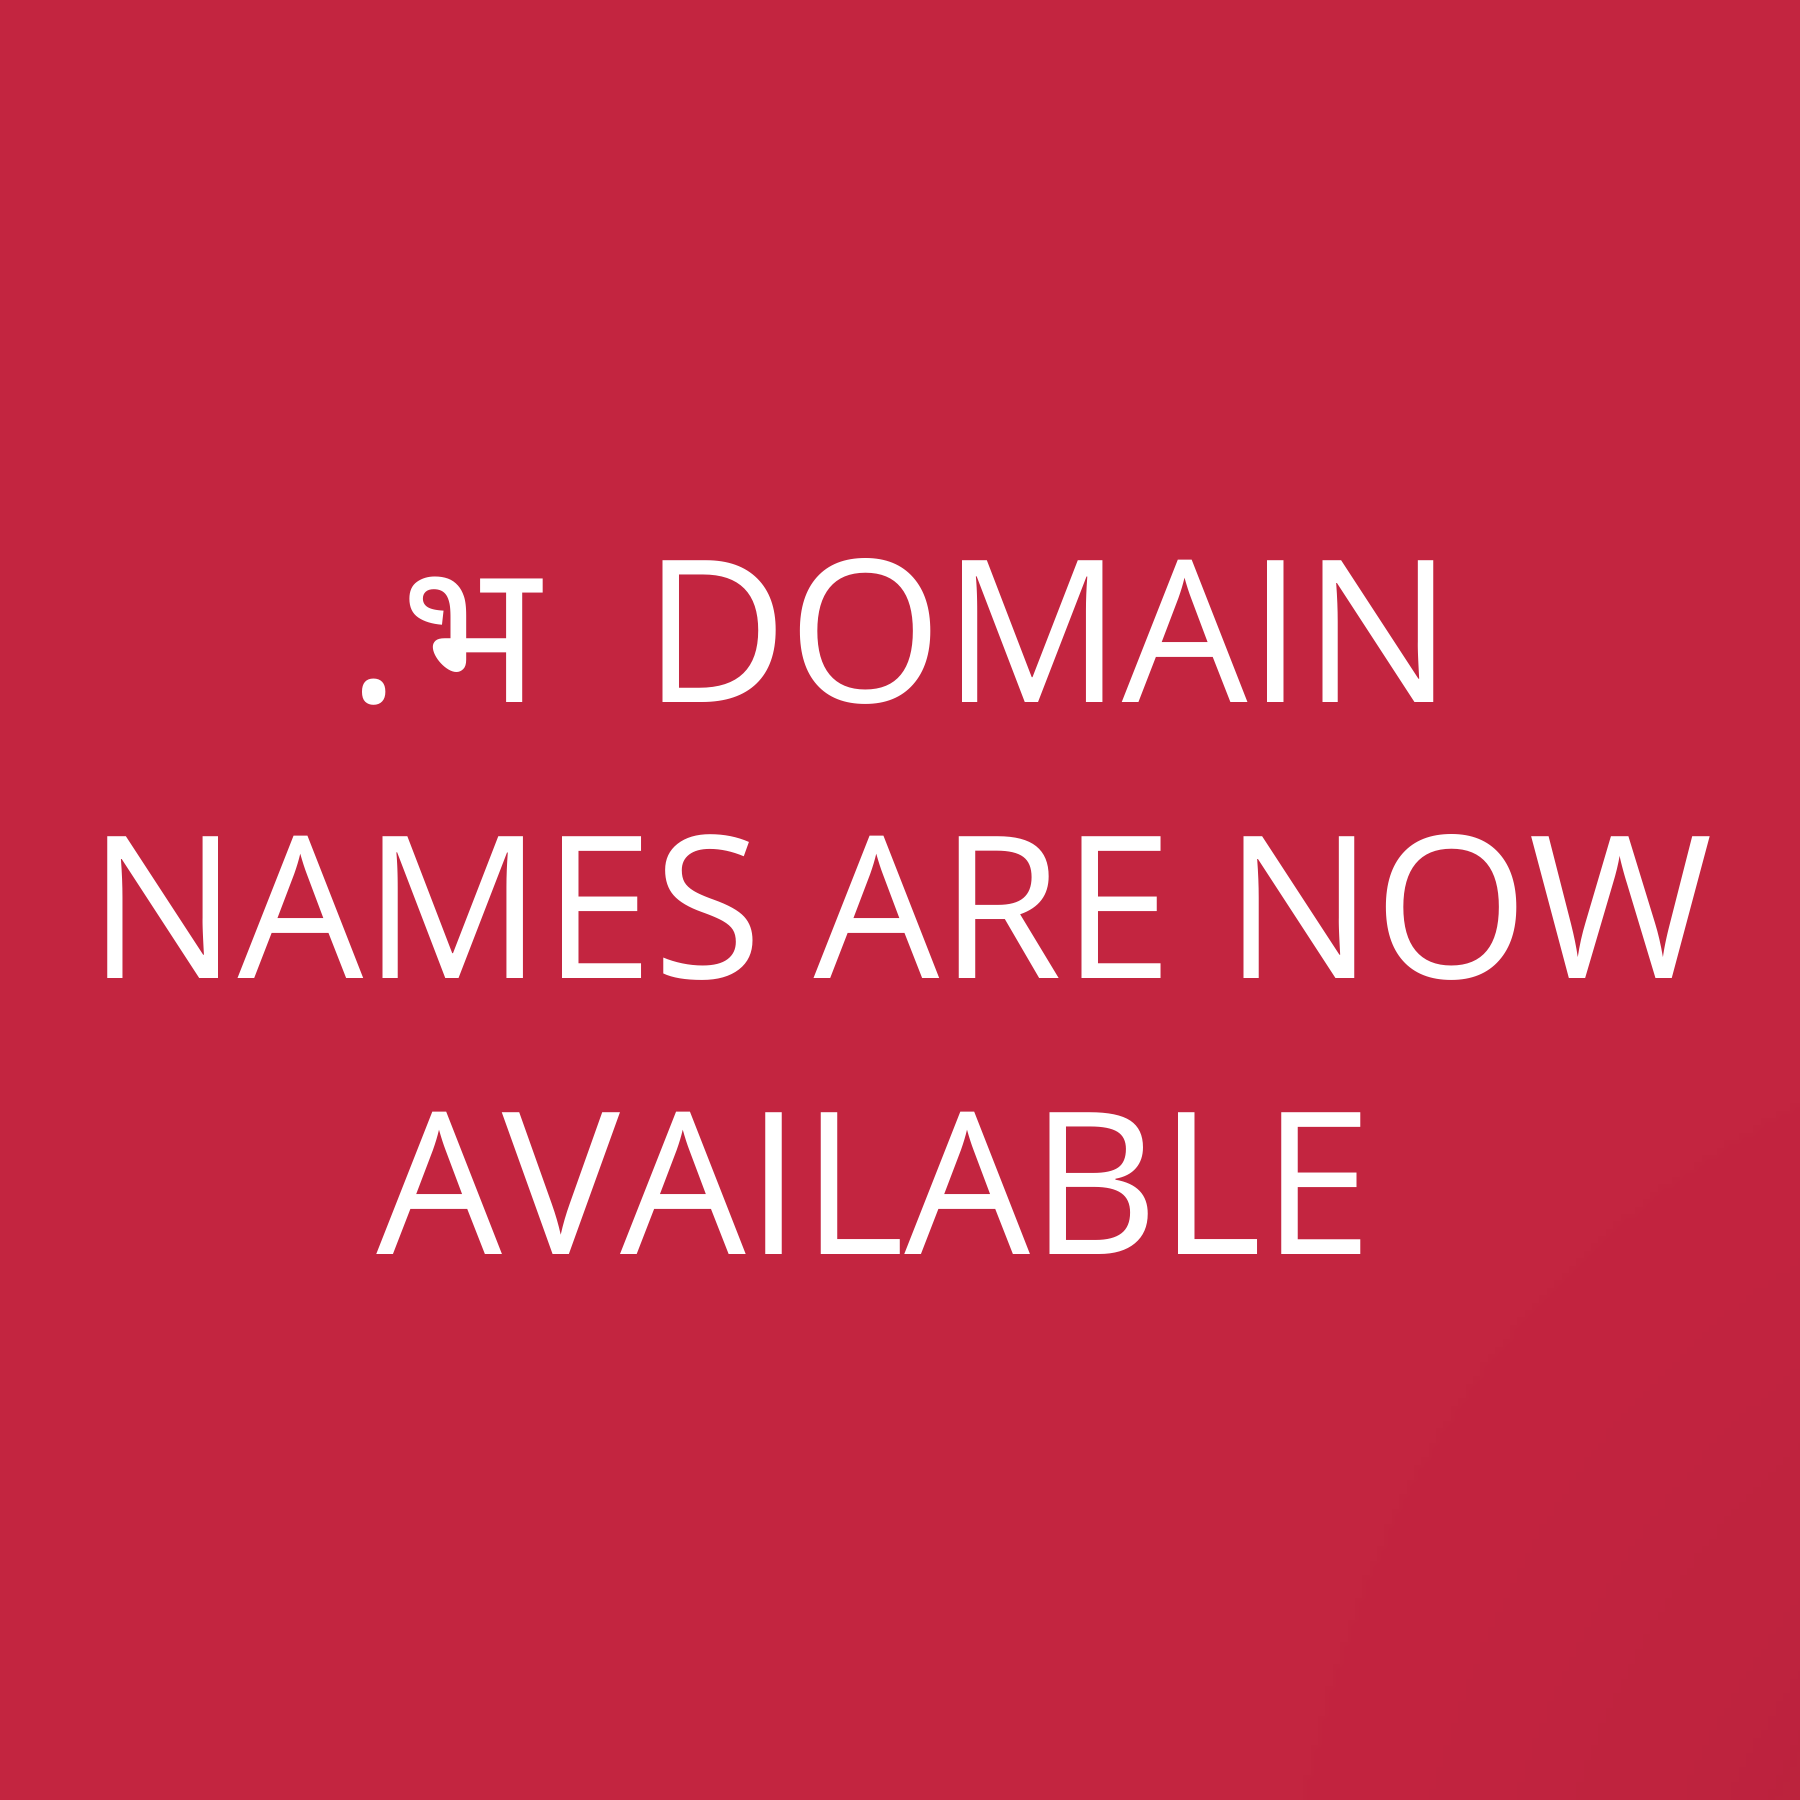 .भ domain names are now available